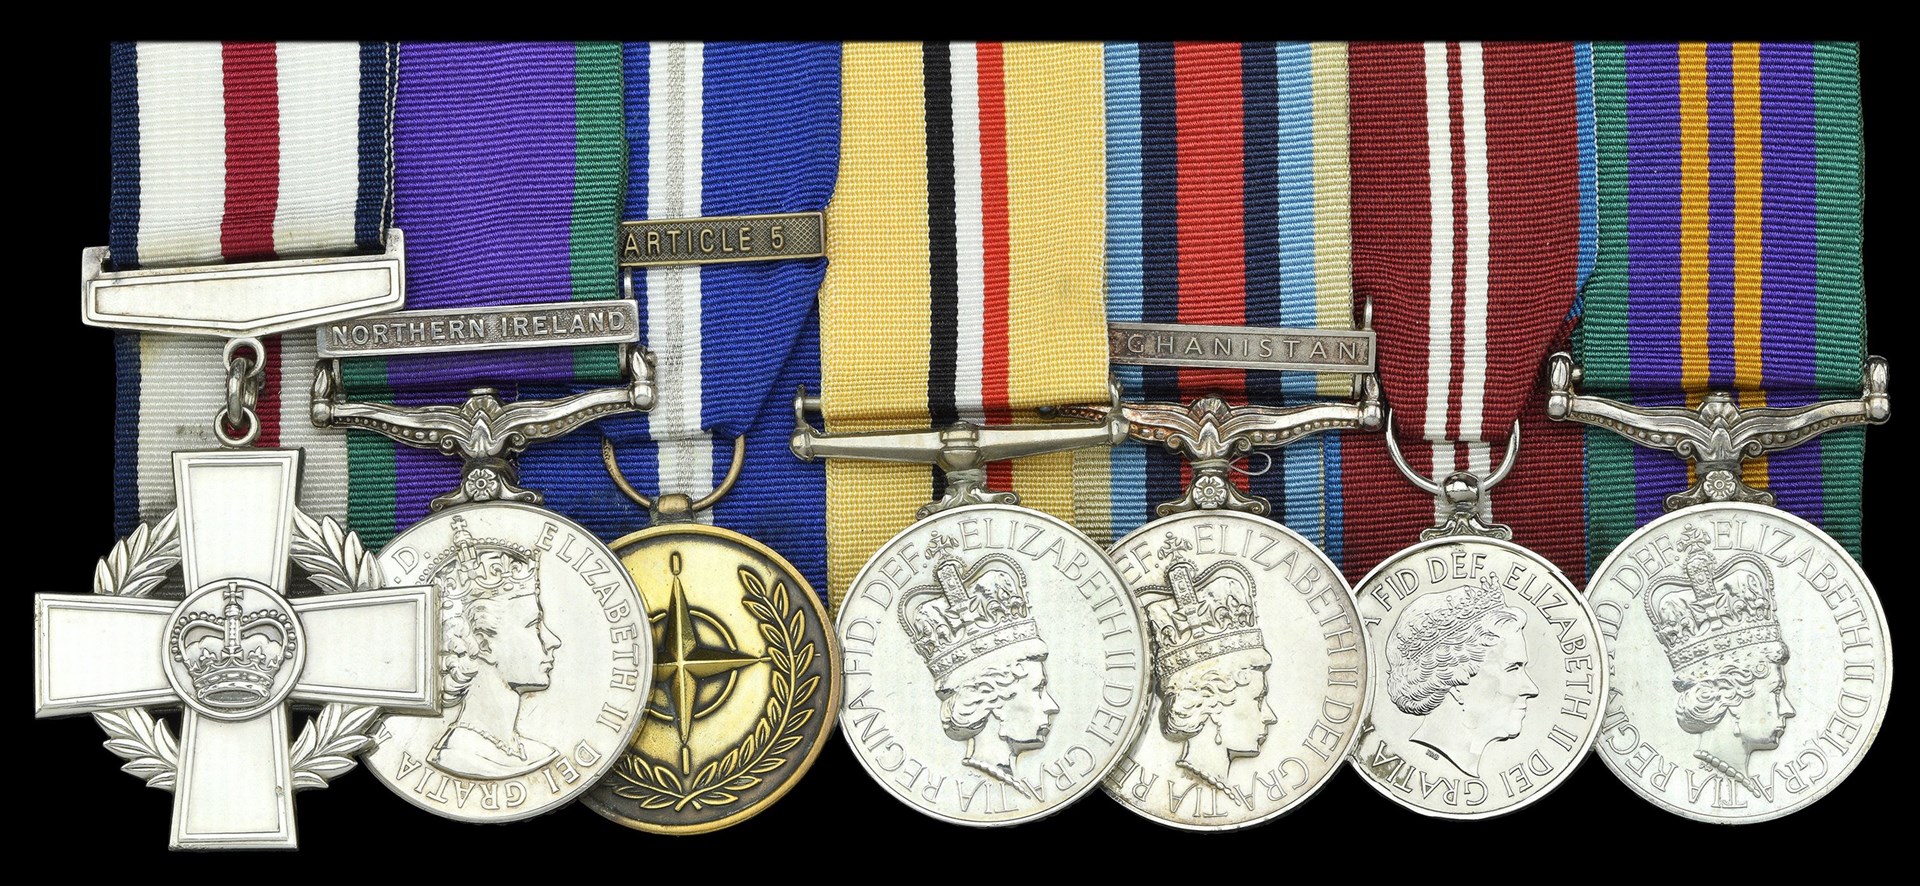 Among the medals are a General Service Medal, the Operational Service Medal for Afghanistan and the Jubilee Medal (Dix Noonan Webb/PA)